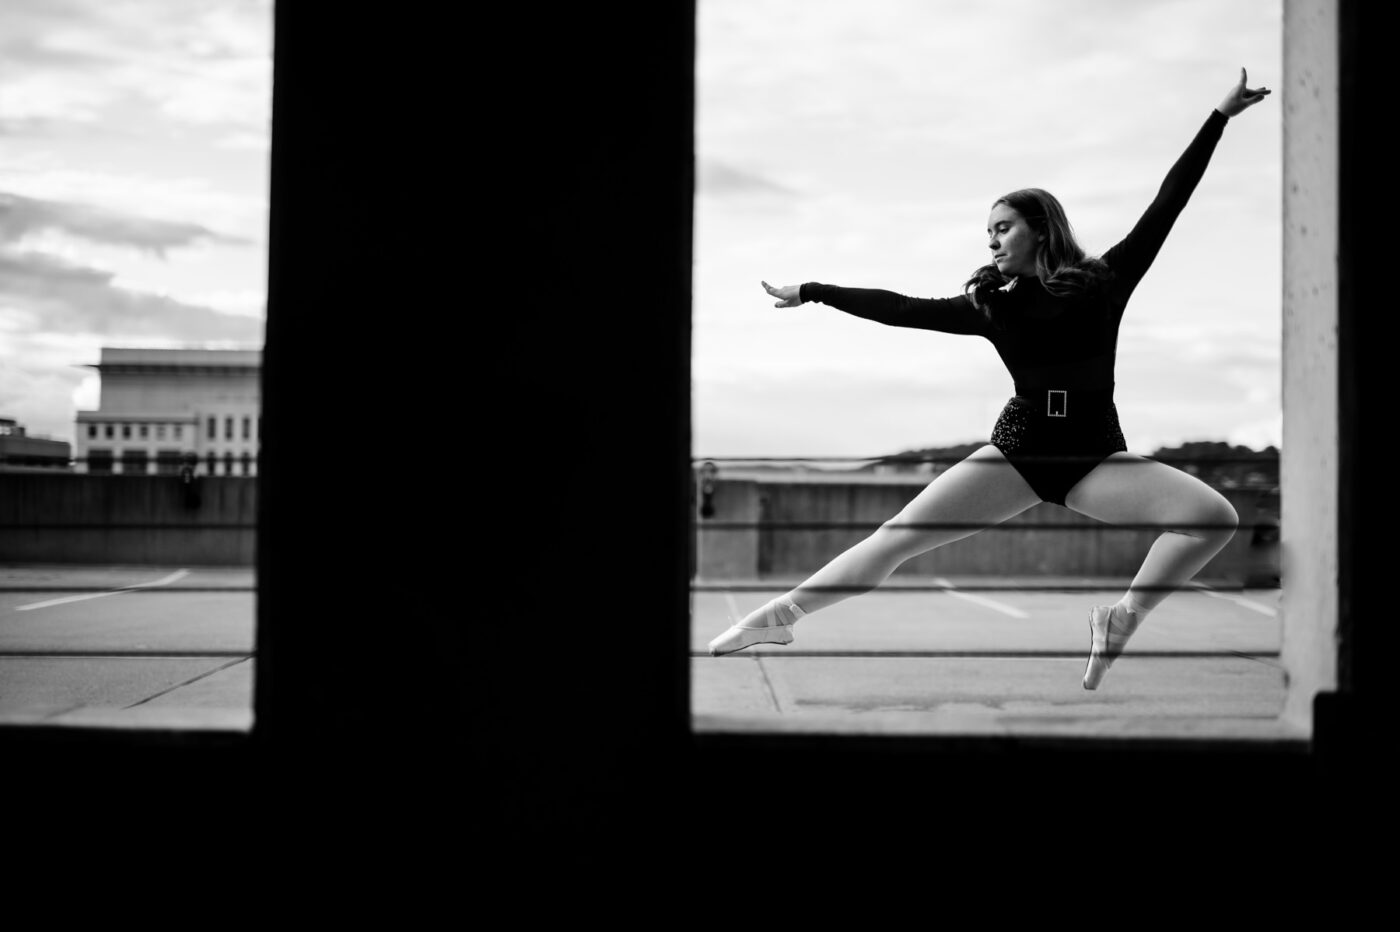 Lydia attempts a jump in her ballet attire during a portrait session in a Charleston parking garage. 